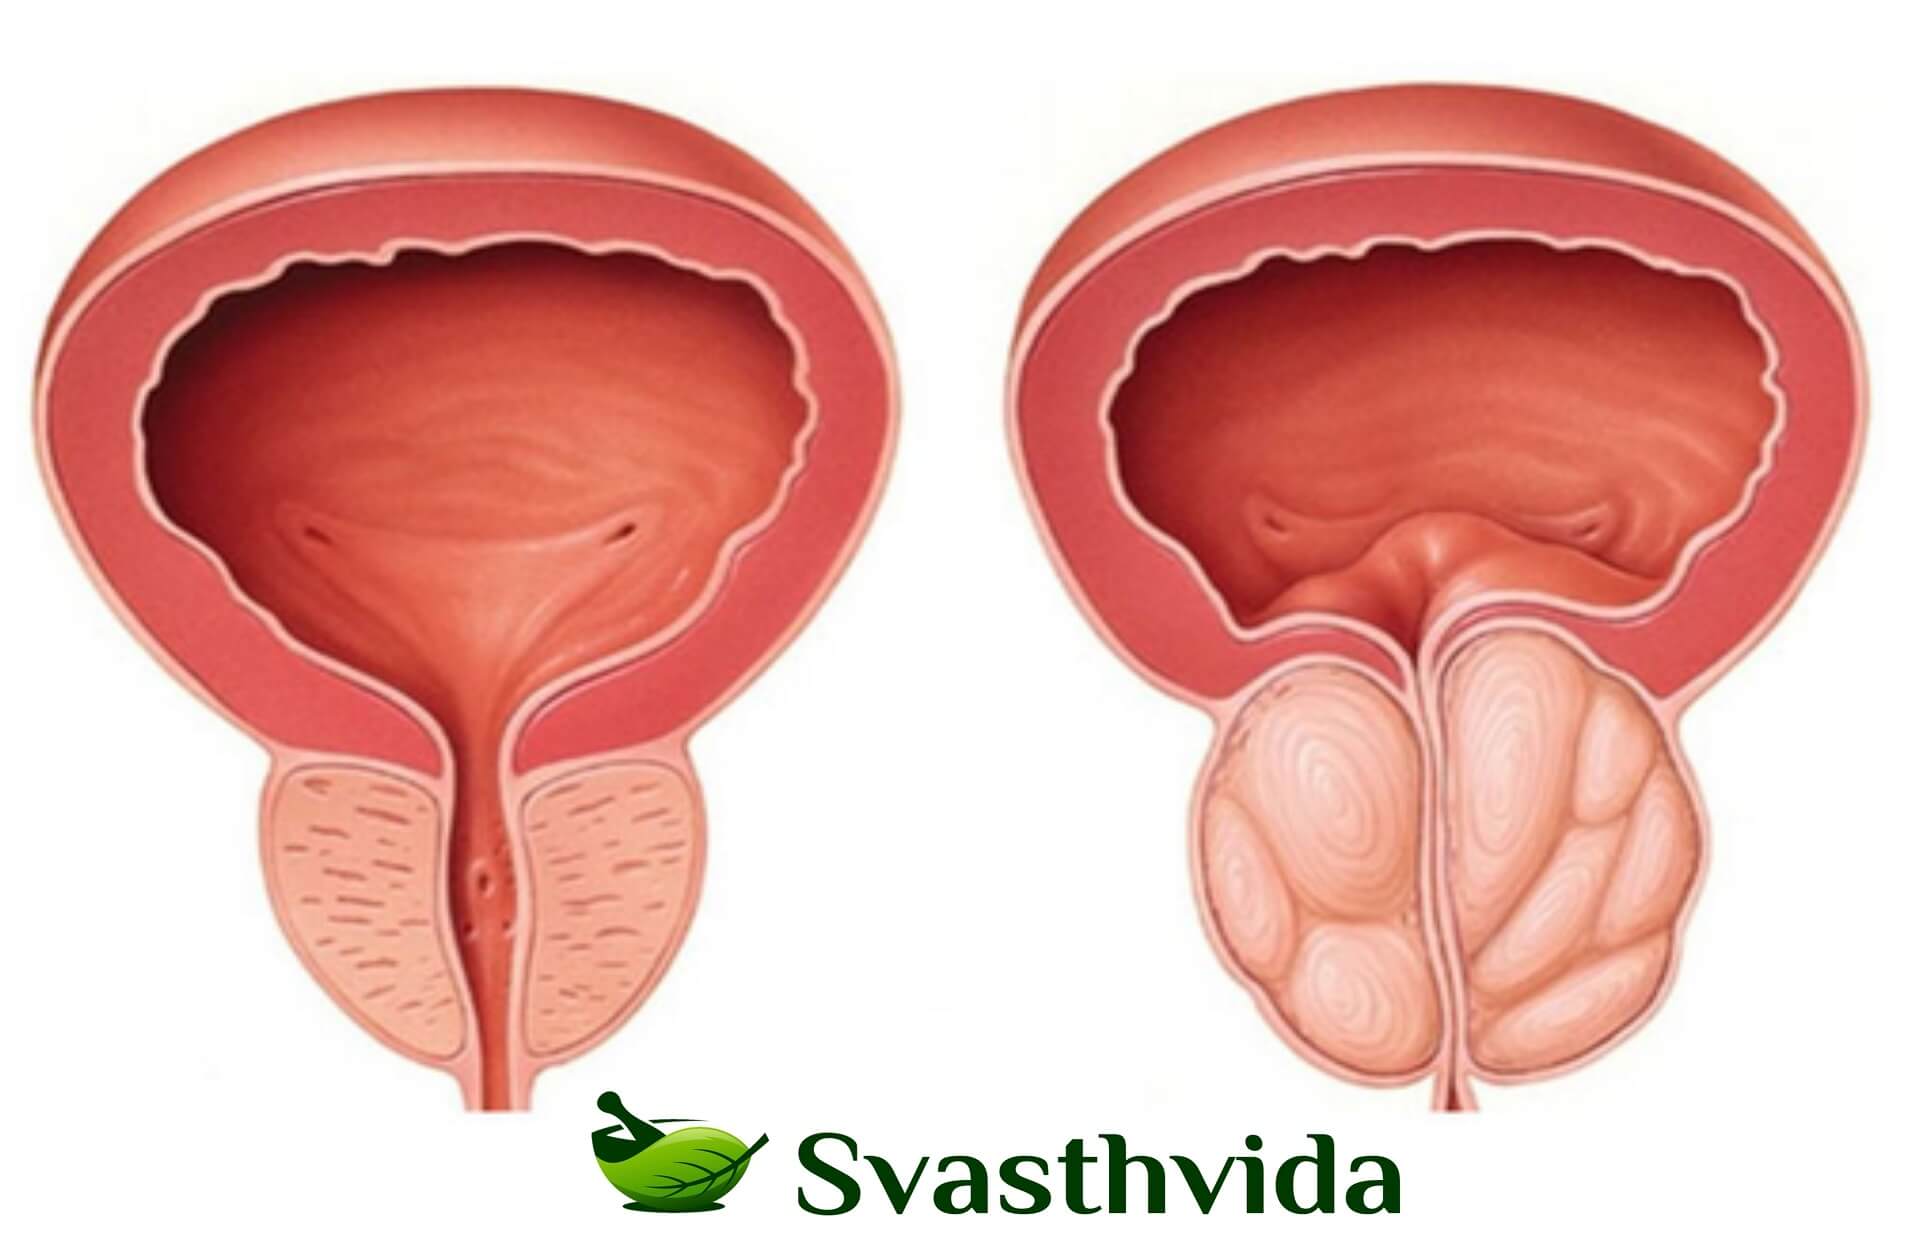 Ayurvedic Treatment For Enlarged Prostate In Samana